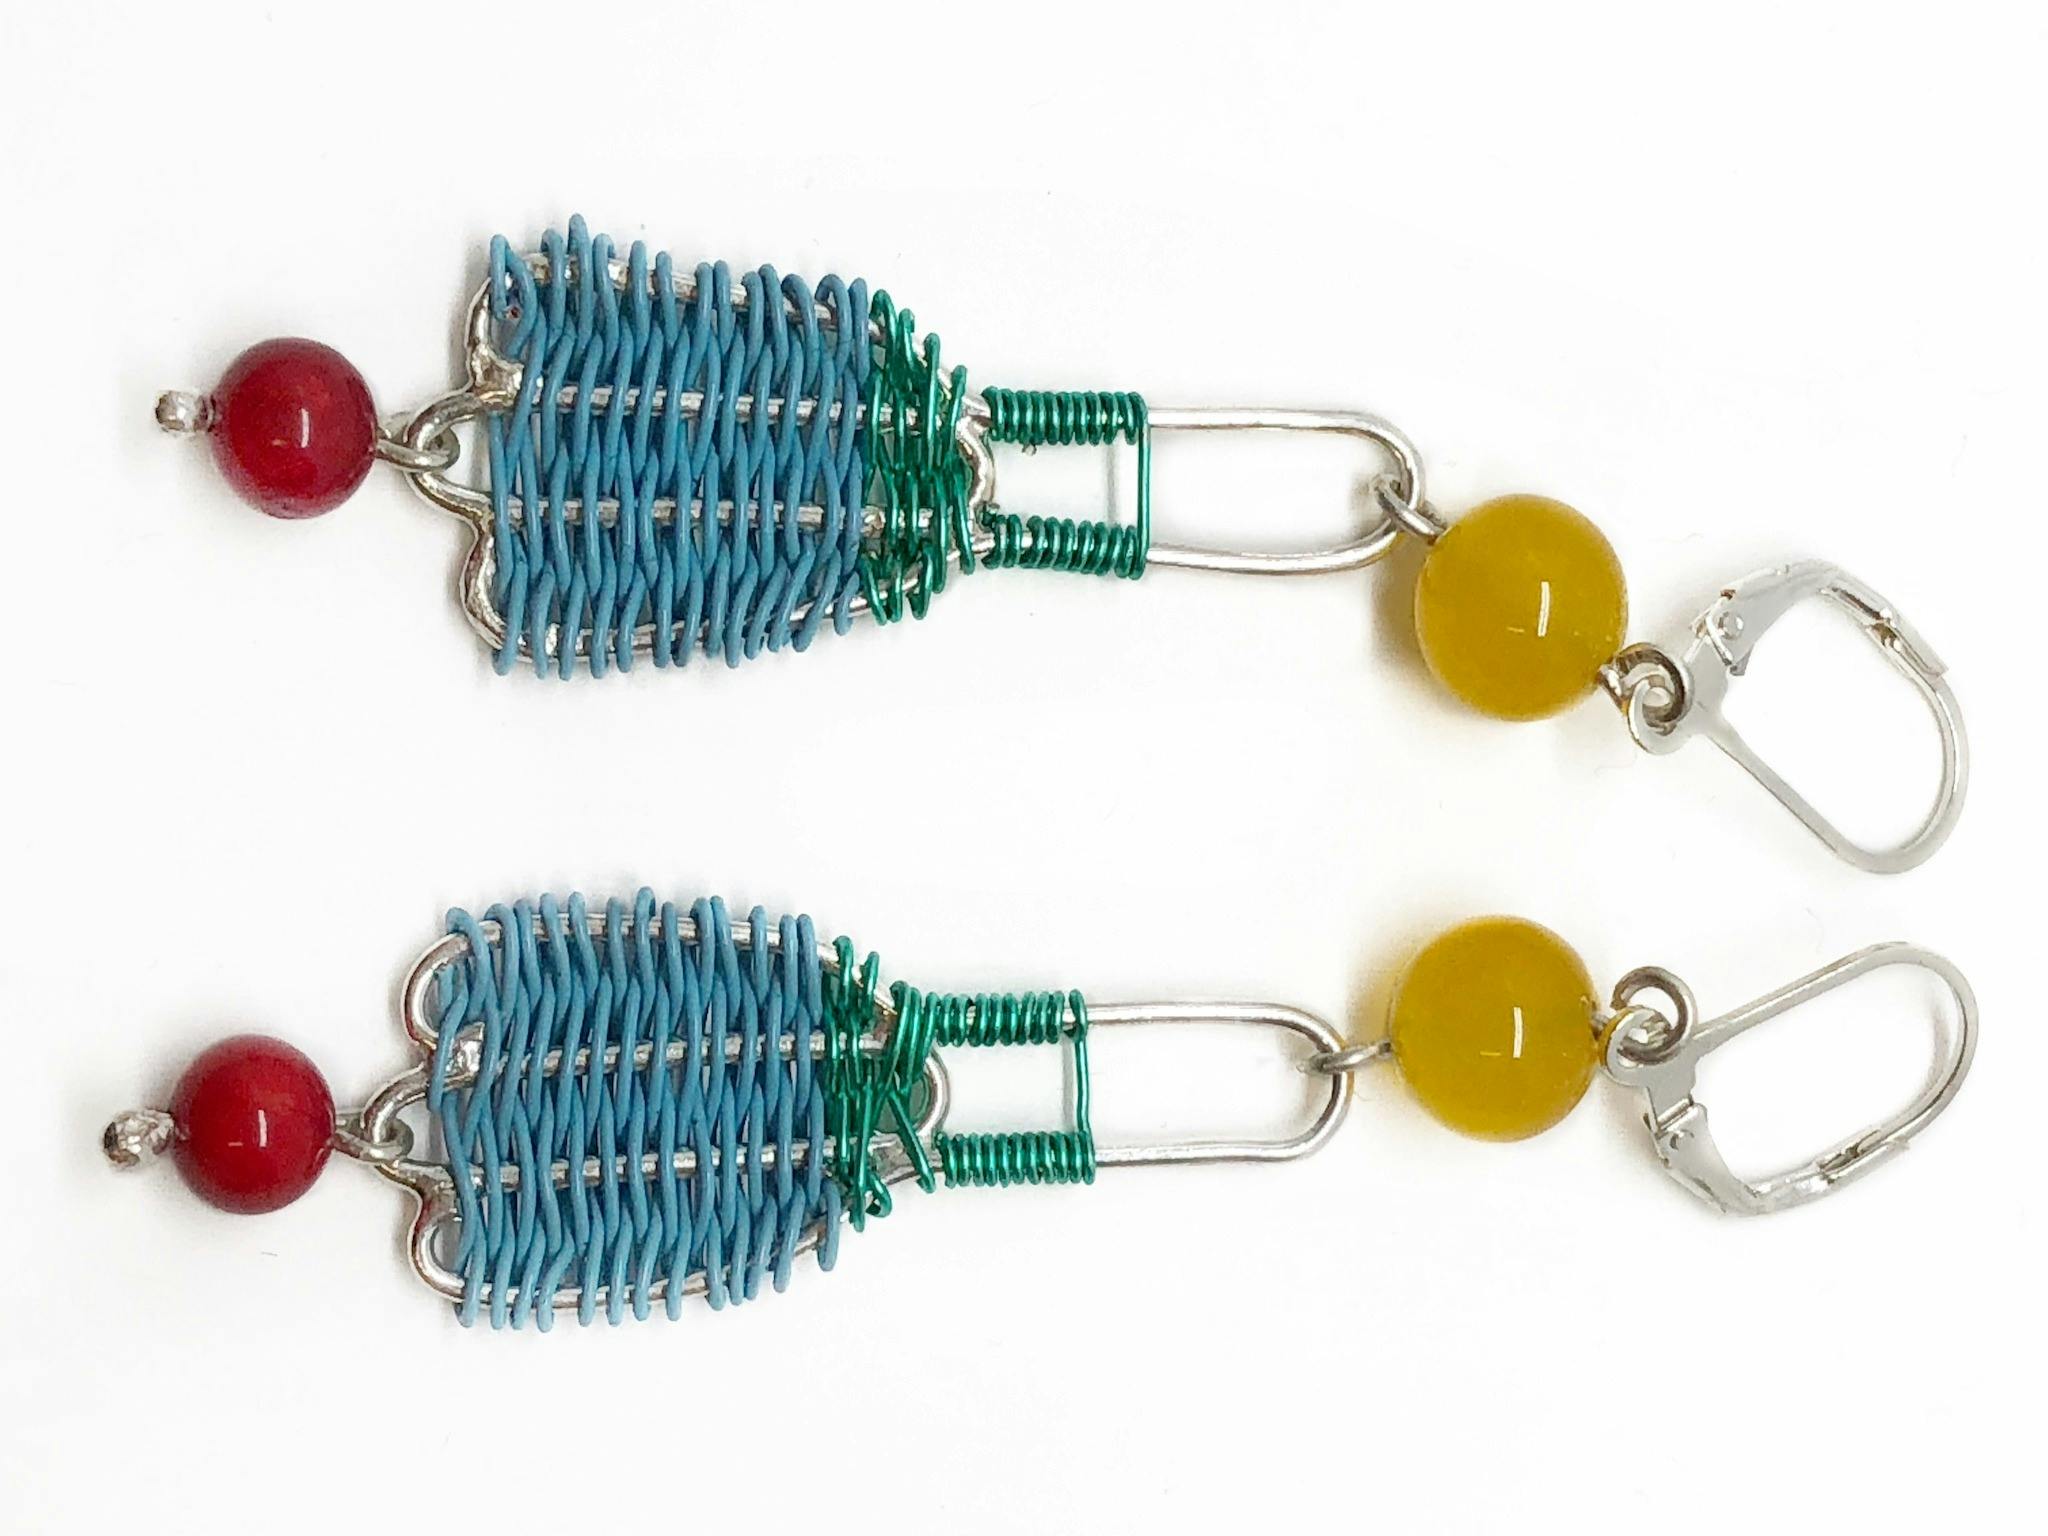 Earrings Made with recycled materials